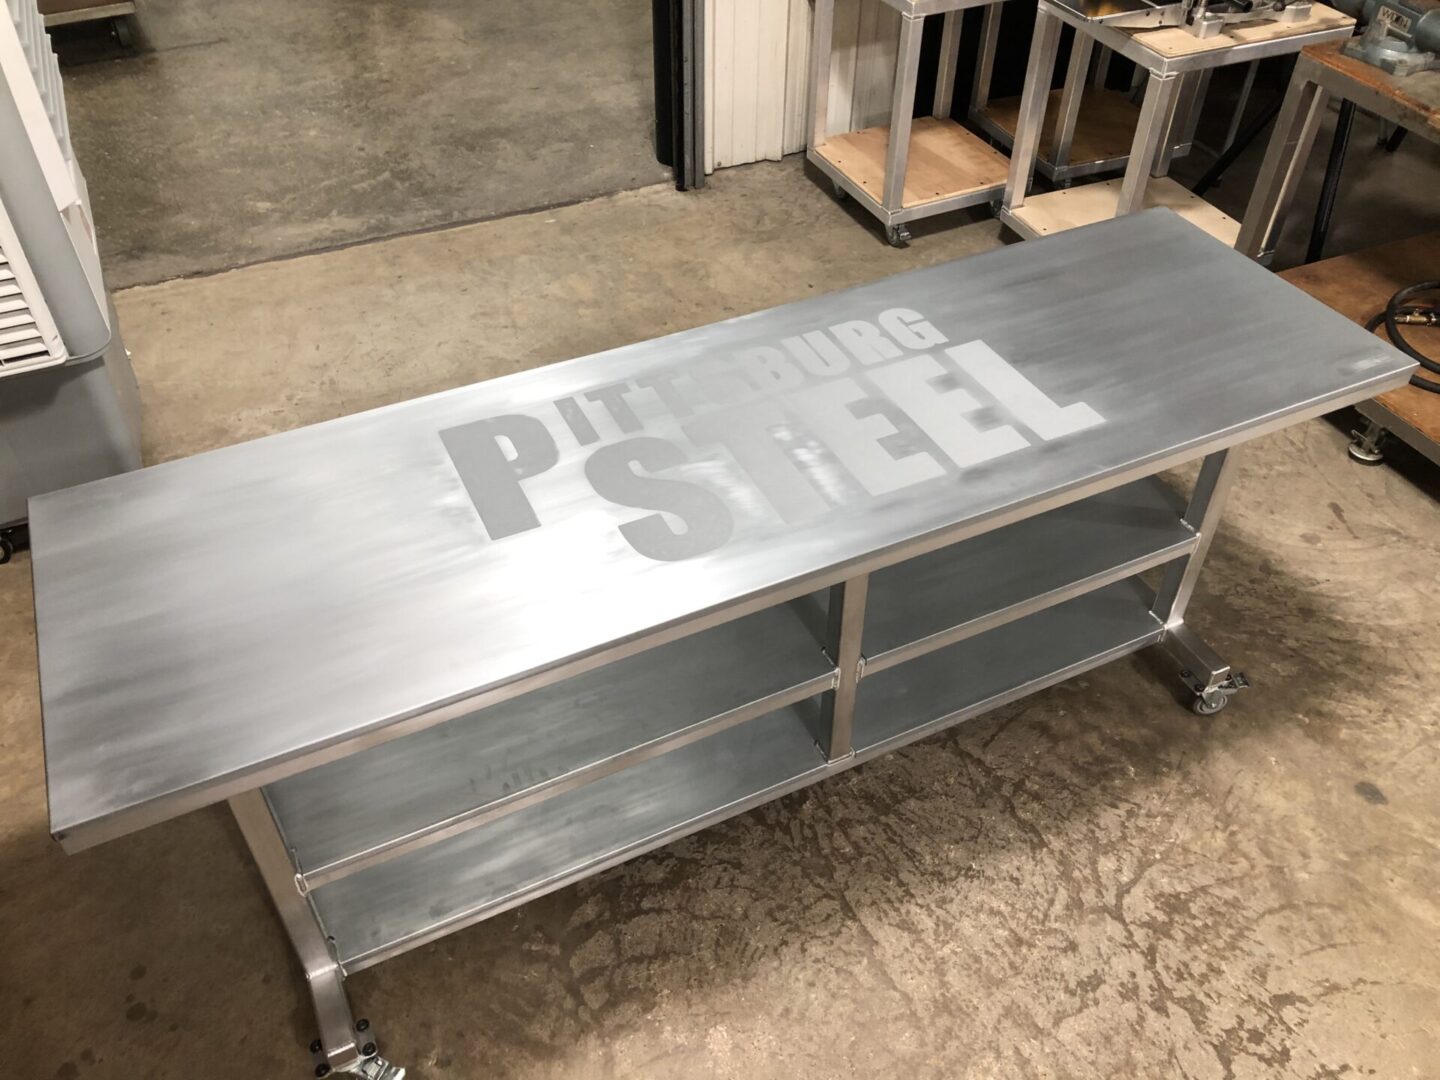 Top View of Table with Pittsburg Steel Logo